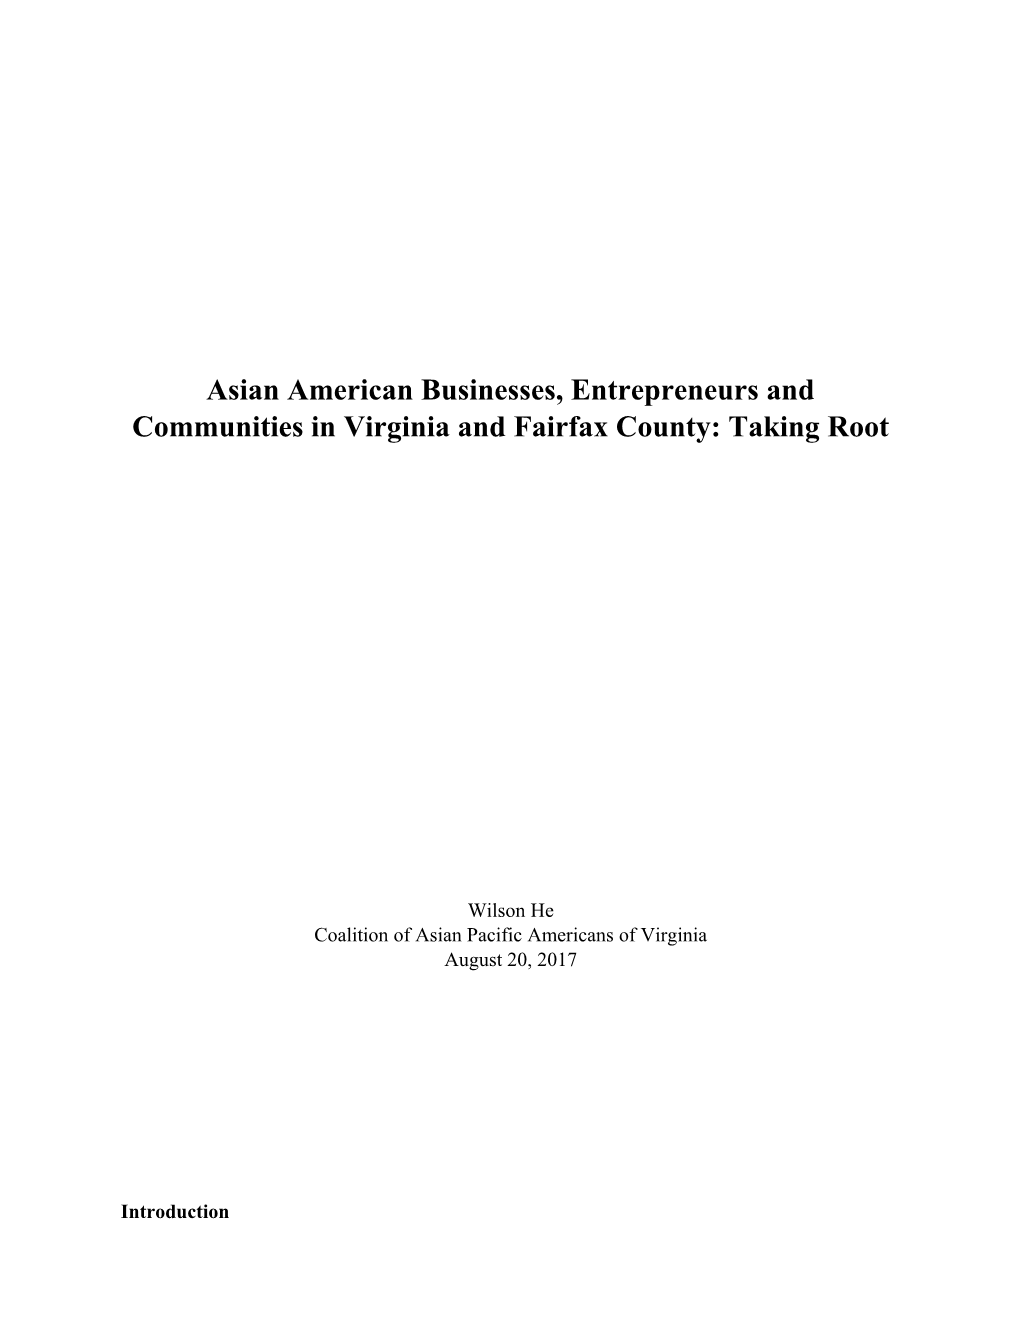 Asian American Businesses, Entrepreneurs Andcommunities in Virginia and Fairfax County